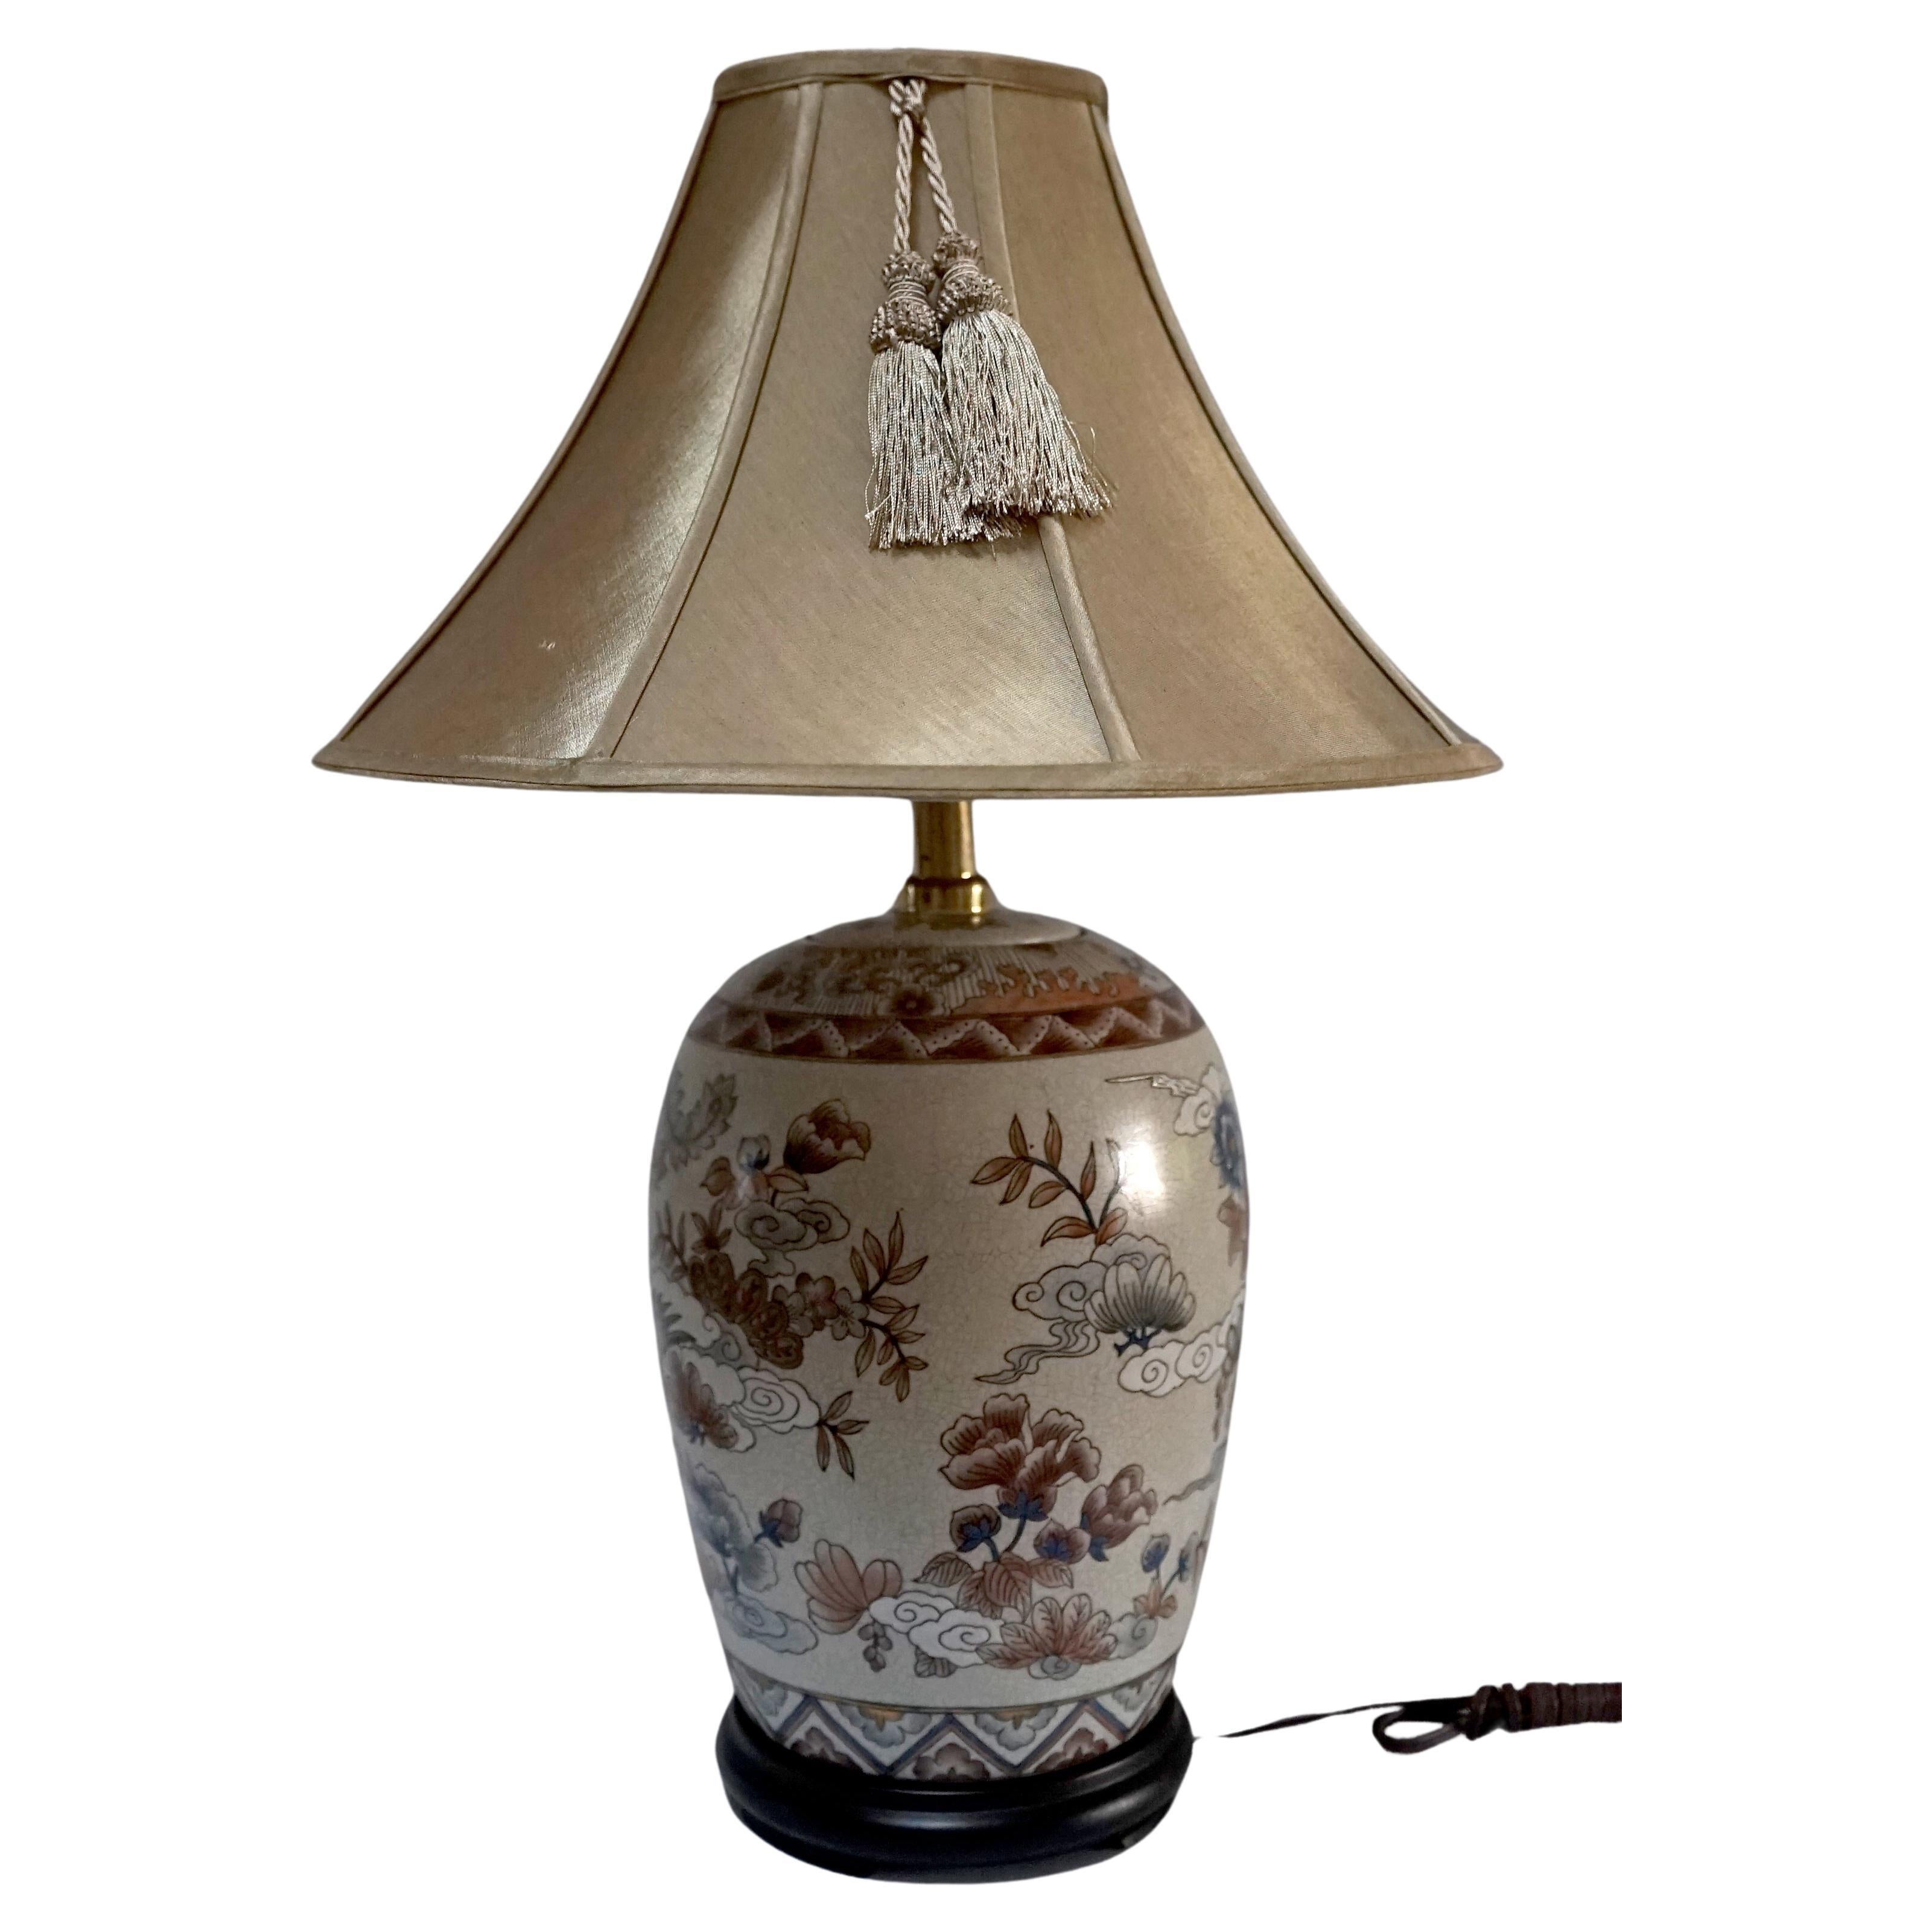 Vintage Japanese Table Lamp with Geometric, Birds, Clouds Motif